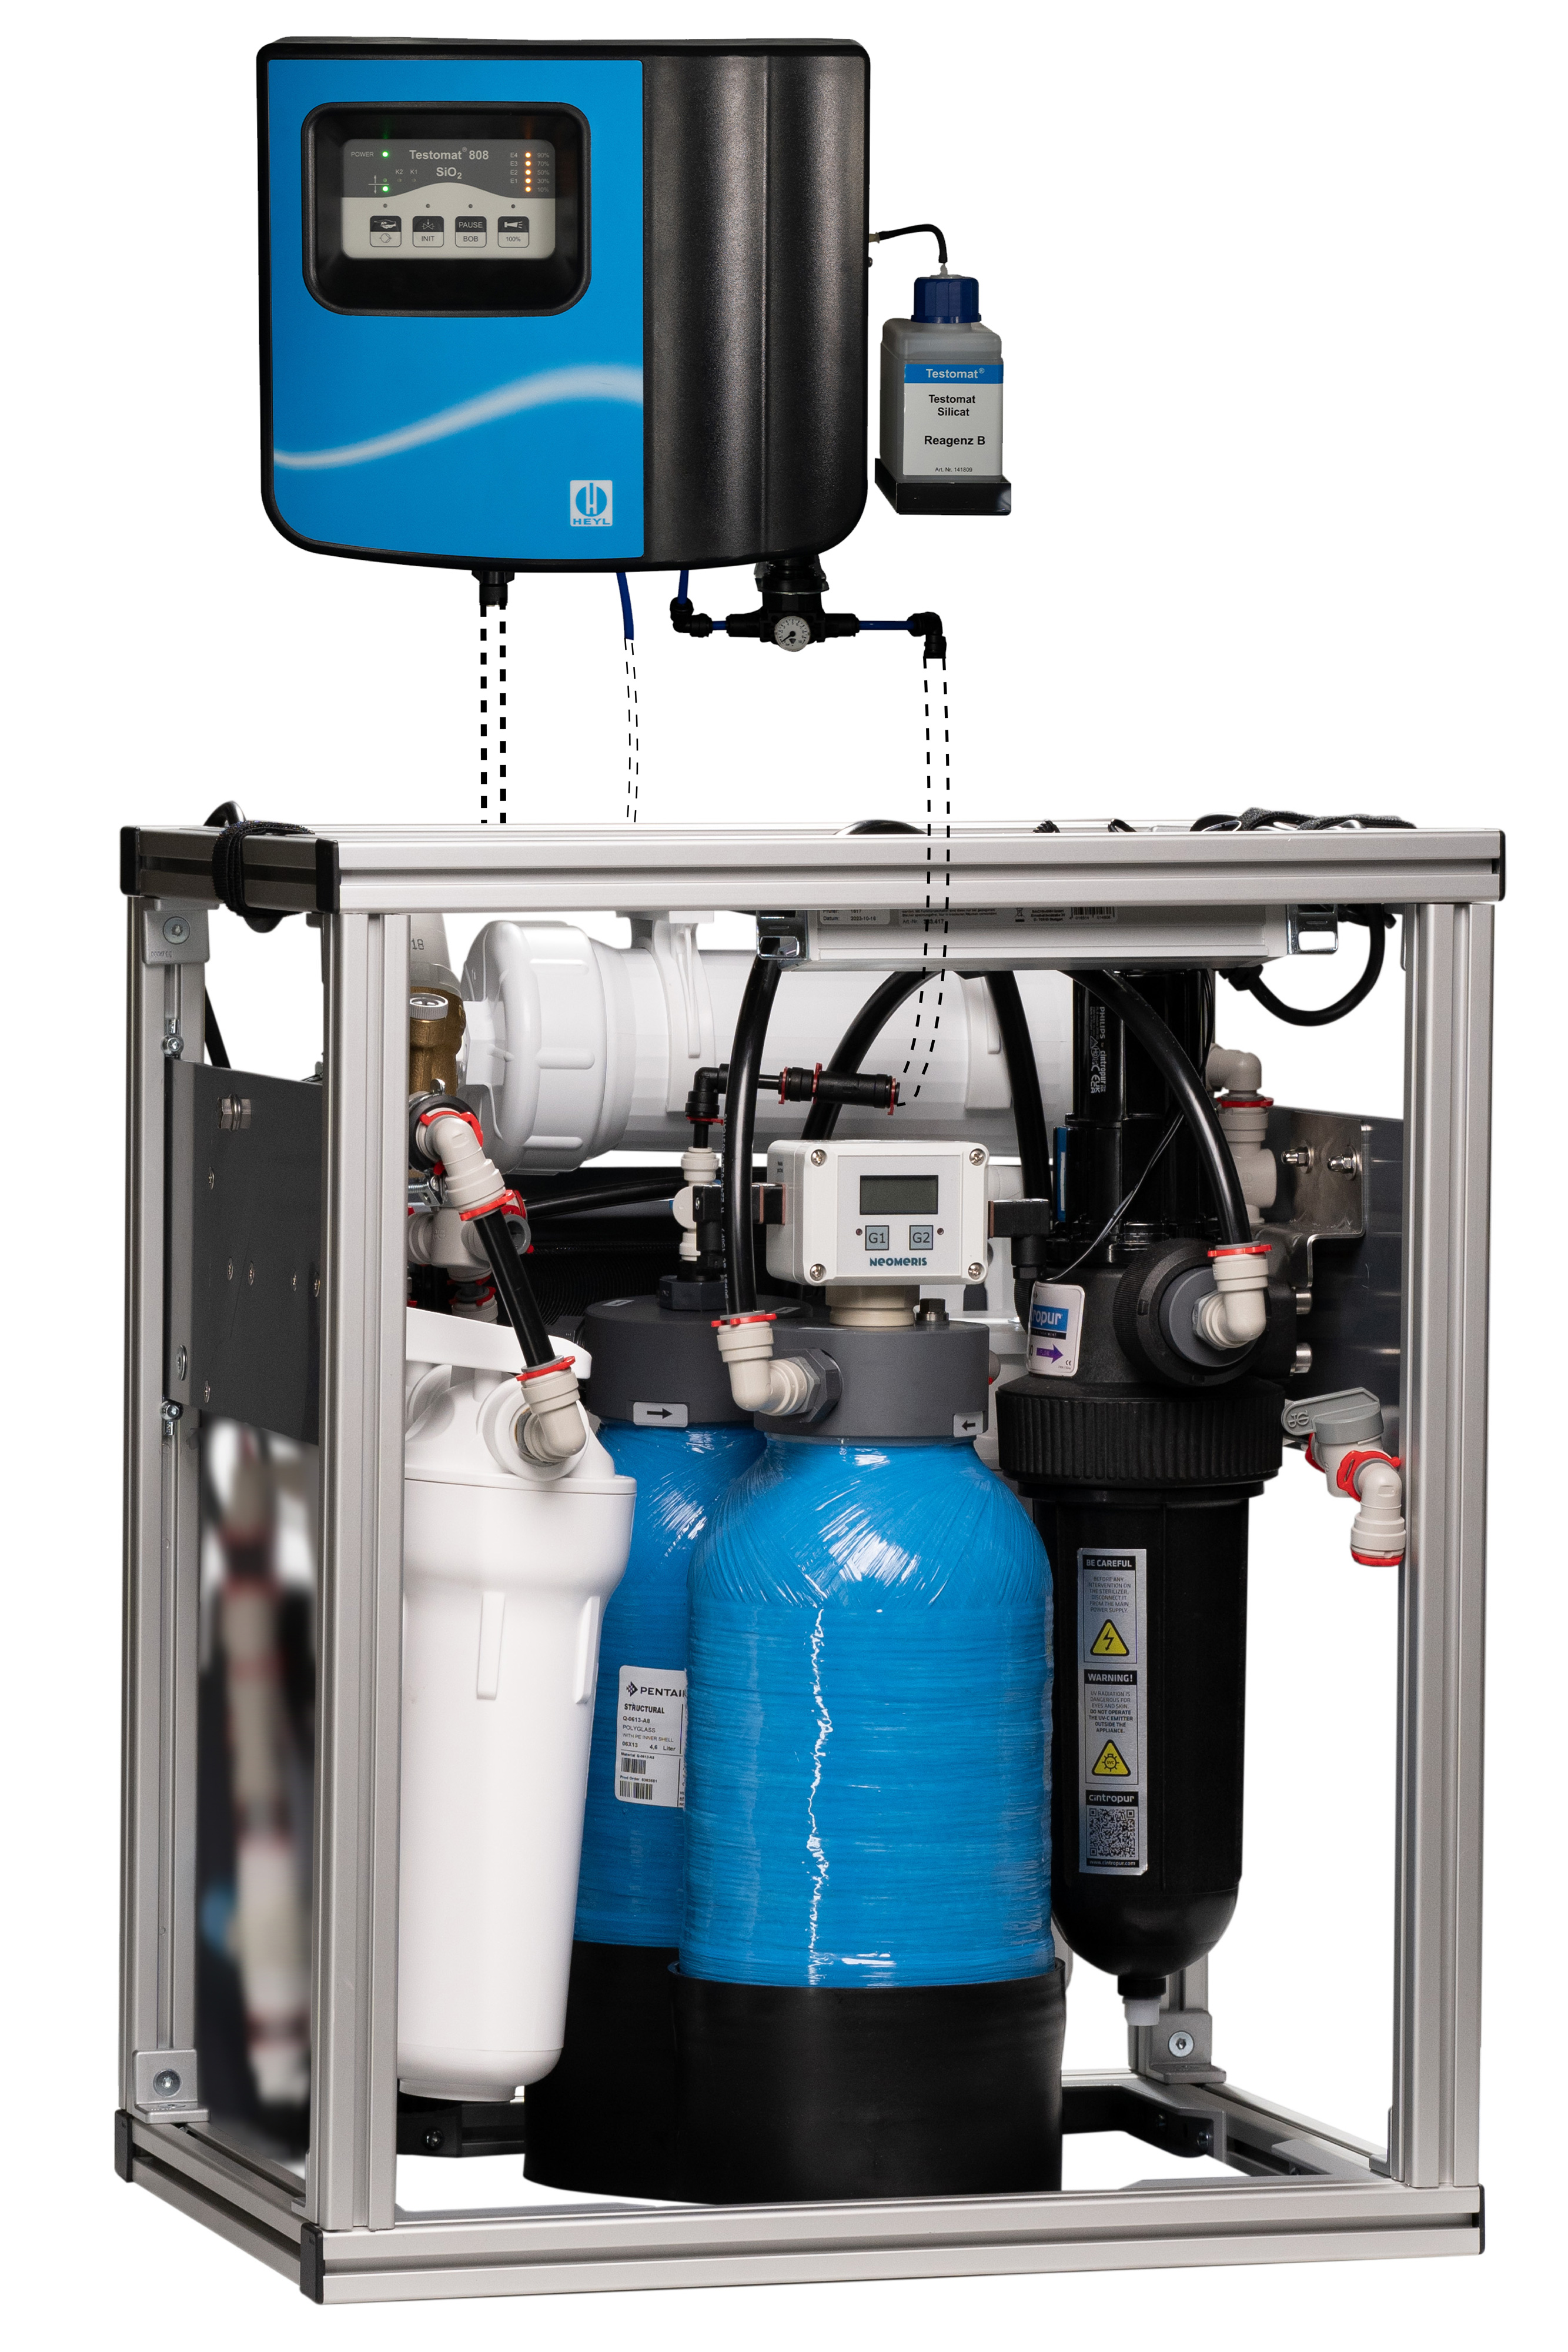 Water treatment system as an under-counter system for outpatient clinics; incl. UV system and pyrogen filter